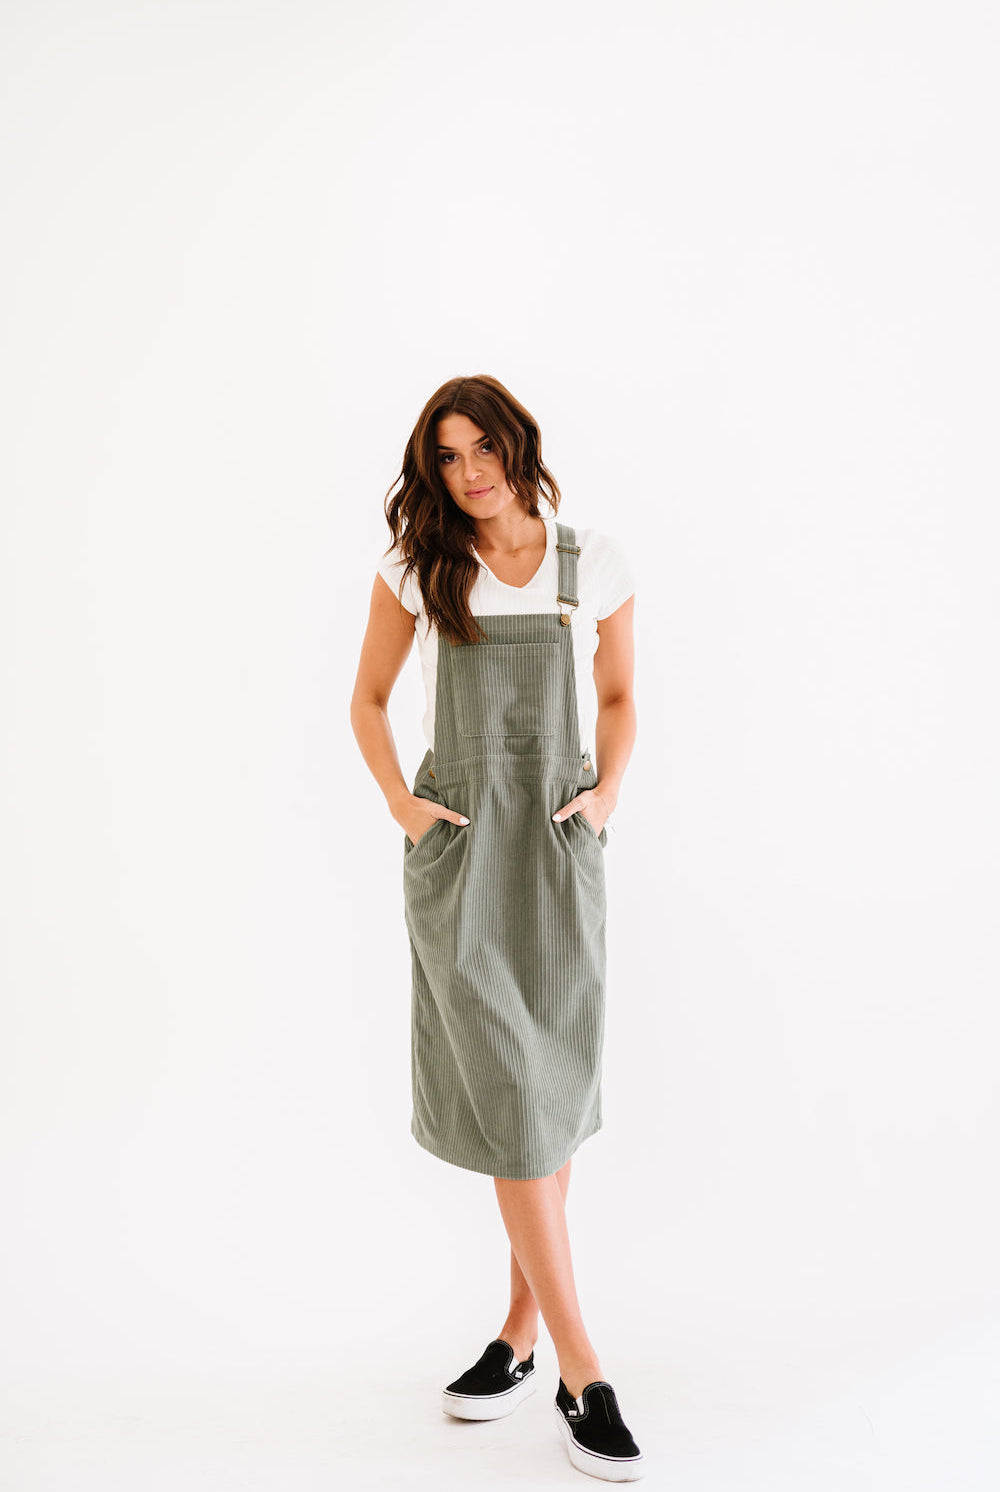 Green corduroy dress with pockets